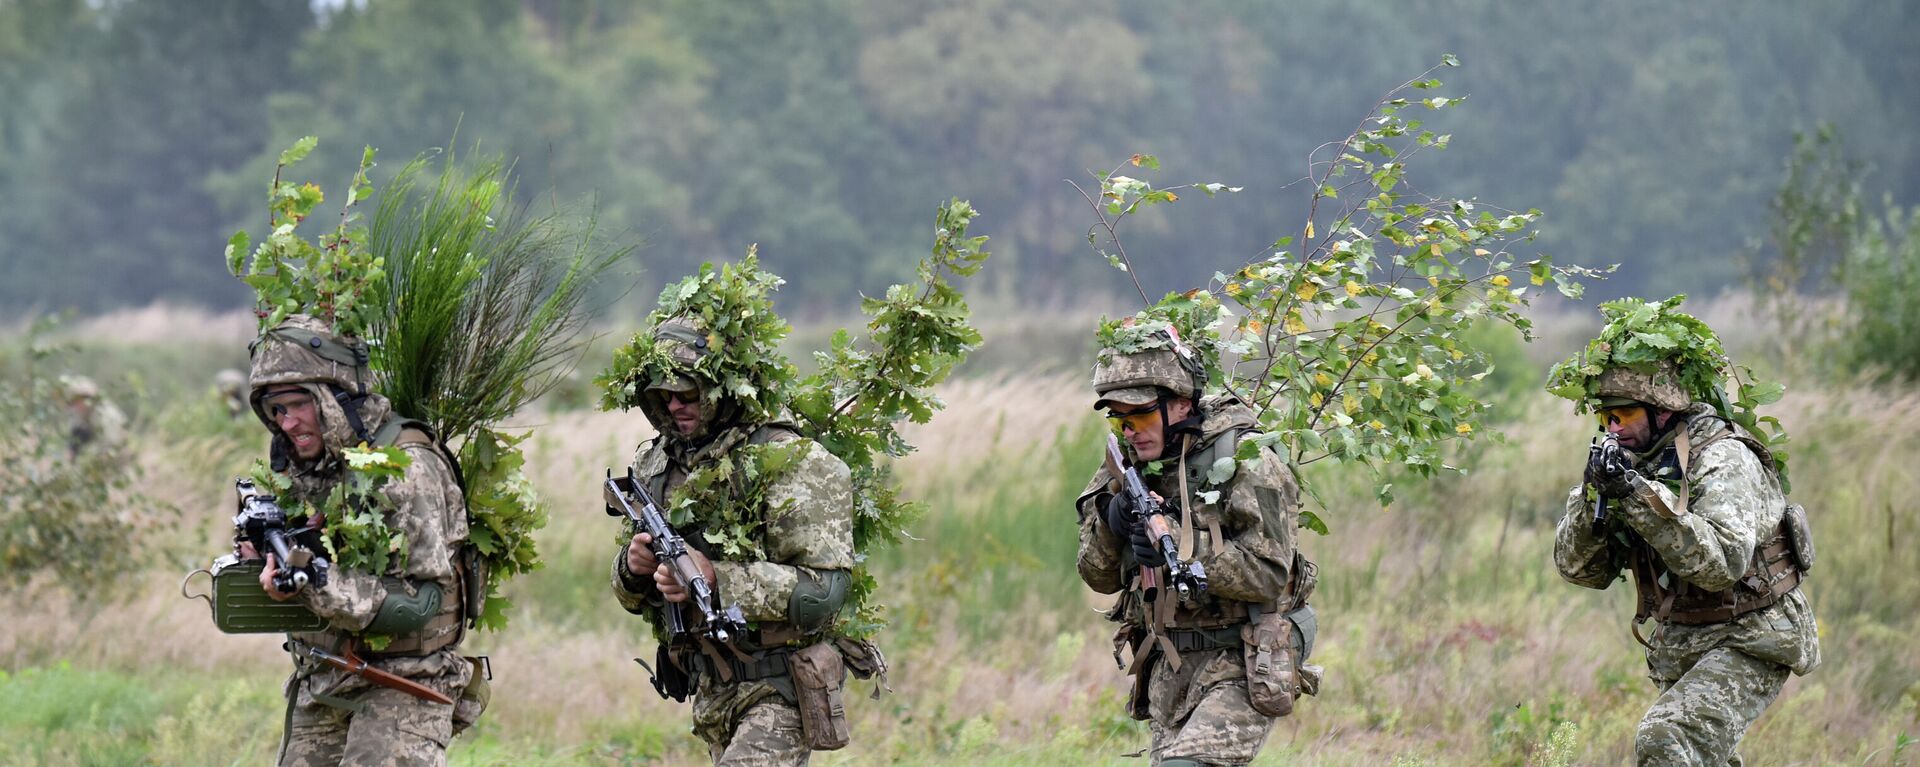 Soldiers take part in an exercise at the Yavoriv military training ground, close to Lvov, Western Ukraine, Friday, Sept 24, 2021. Ukraine, the US, and other NATO countries continue joint military drills in Western Ukraine presenting offensive exercises in town-like surroundings with tanks and other military vehicles involved.  - Sputnik International, 1920, 02.02.2022